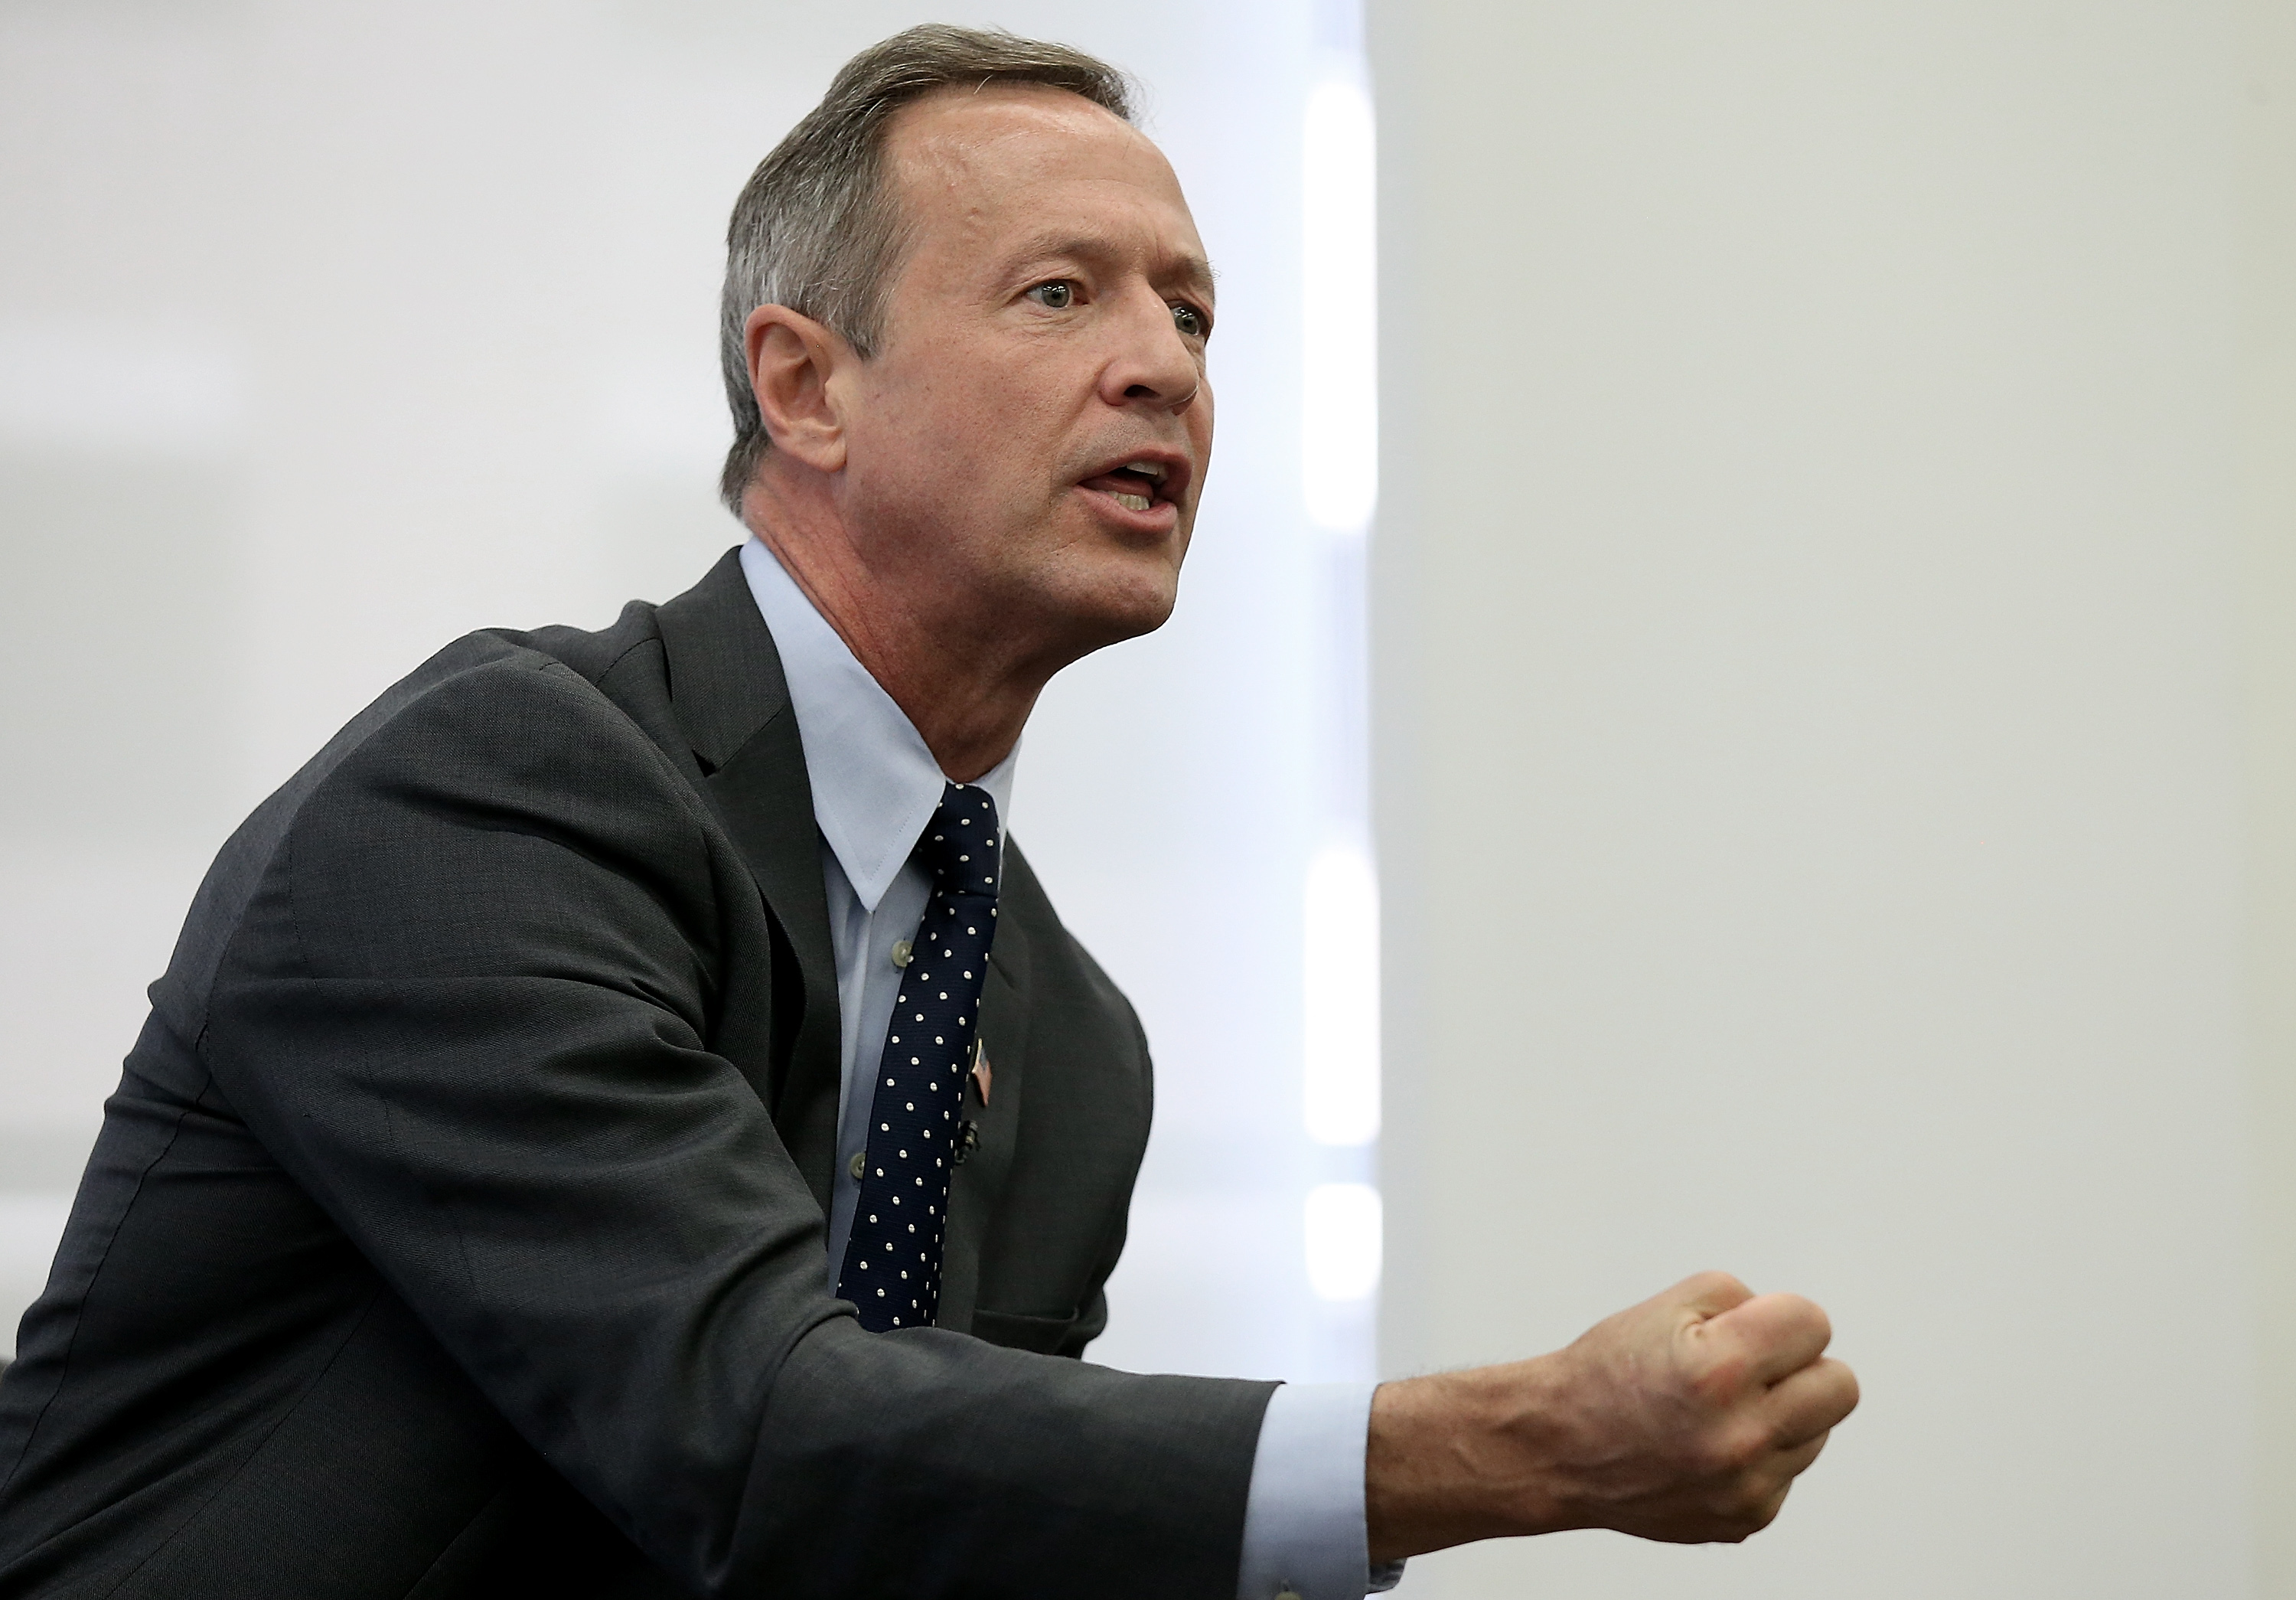 Democratic presidential candidate and former Maryland Gov. Martin O'Malley speaks during an event at the Truman Center for National Policy July 23, 2015 in Washington, DC. (Win McNamee&mdash;Getty Images)